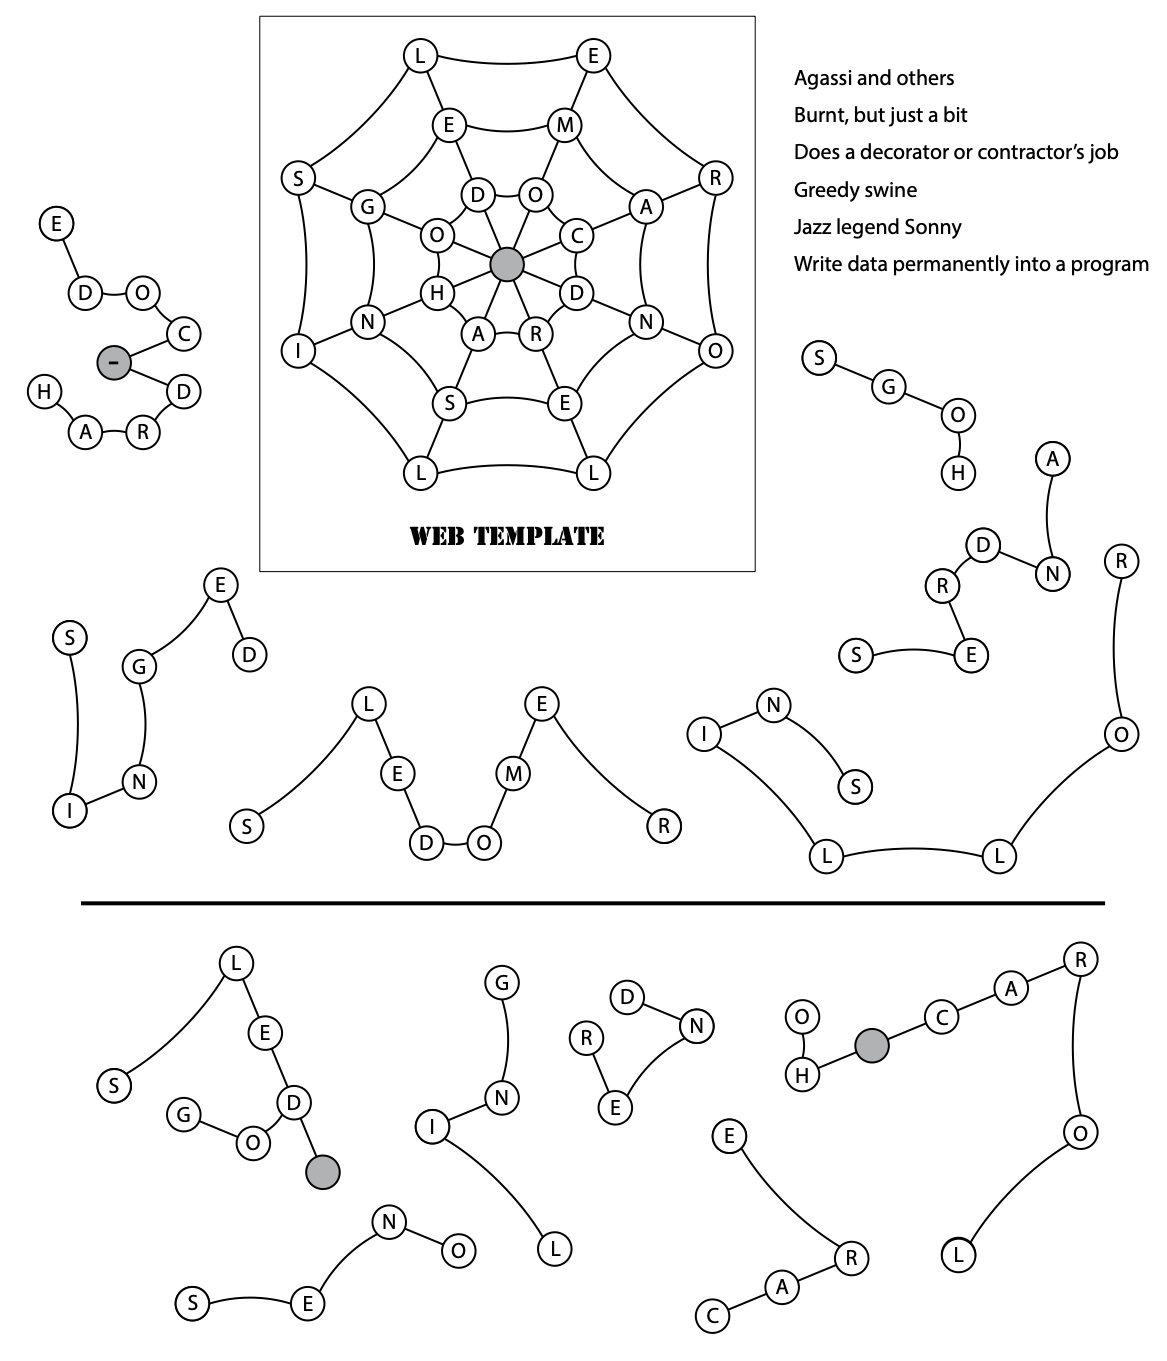 A spider web with letters in the circles at the nodes. There are clues next to the web, whose answers fill nearby graphs that are subgraphs of the web.